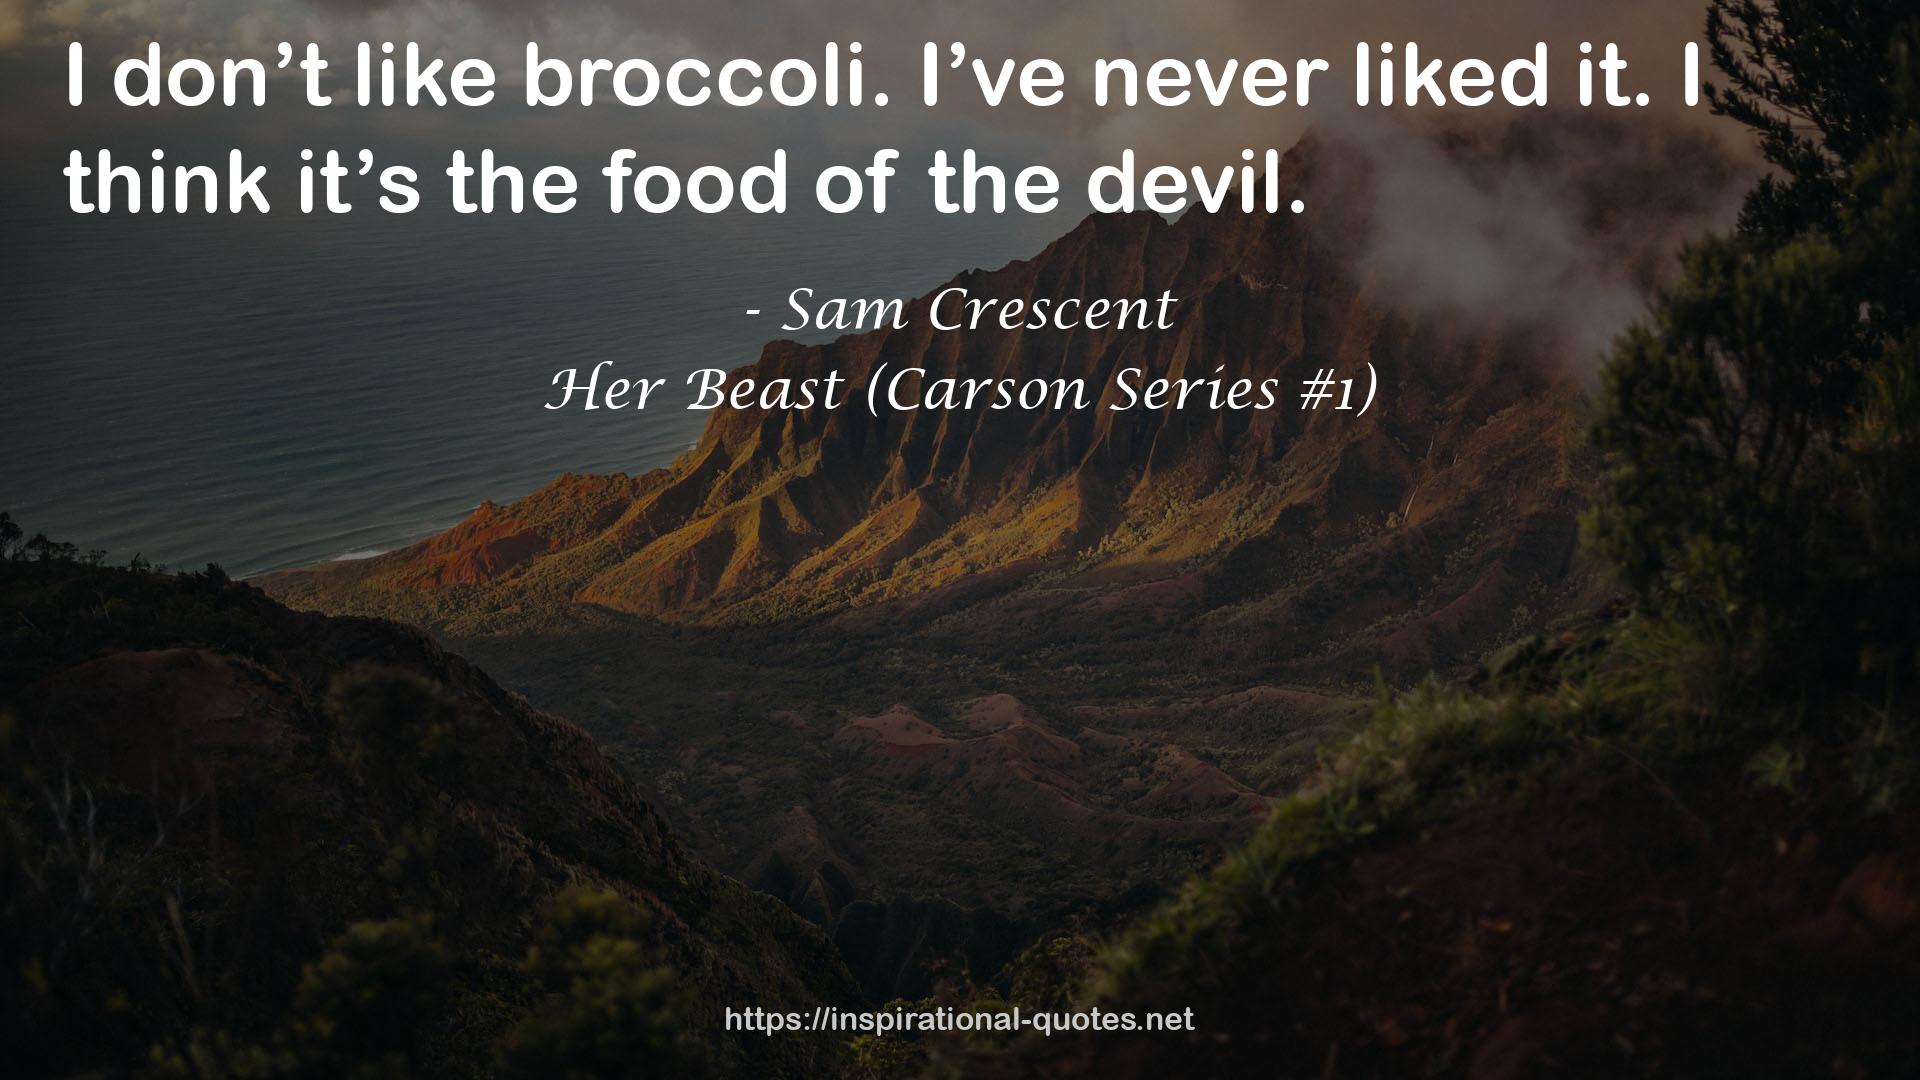 Her Beast (Carson Series #1) QUOTES